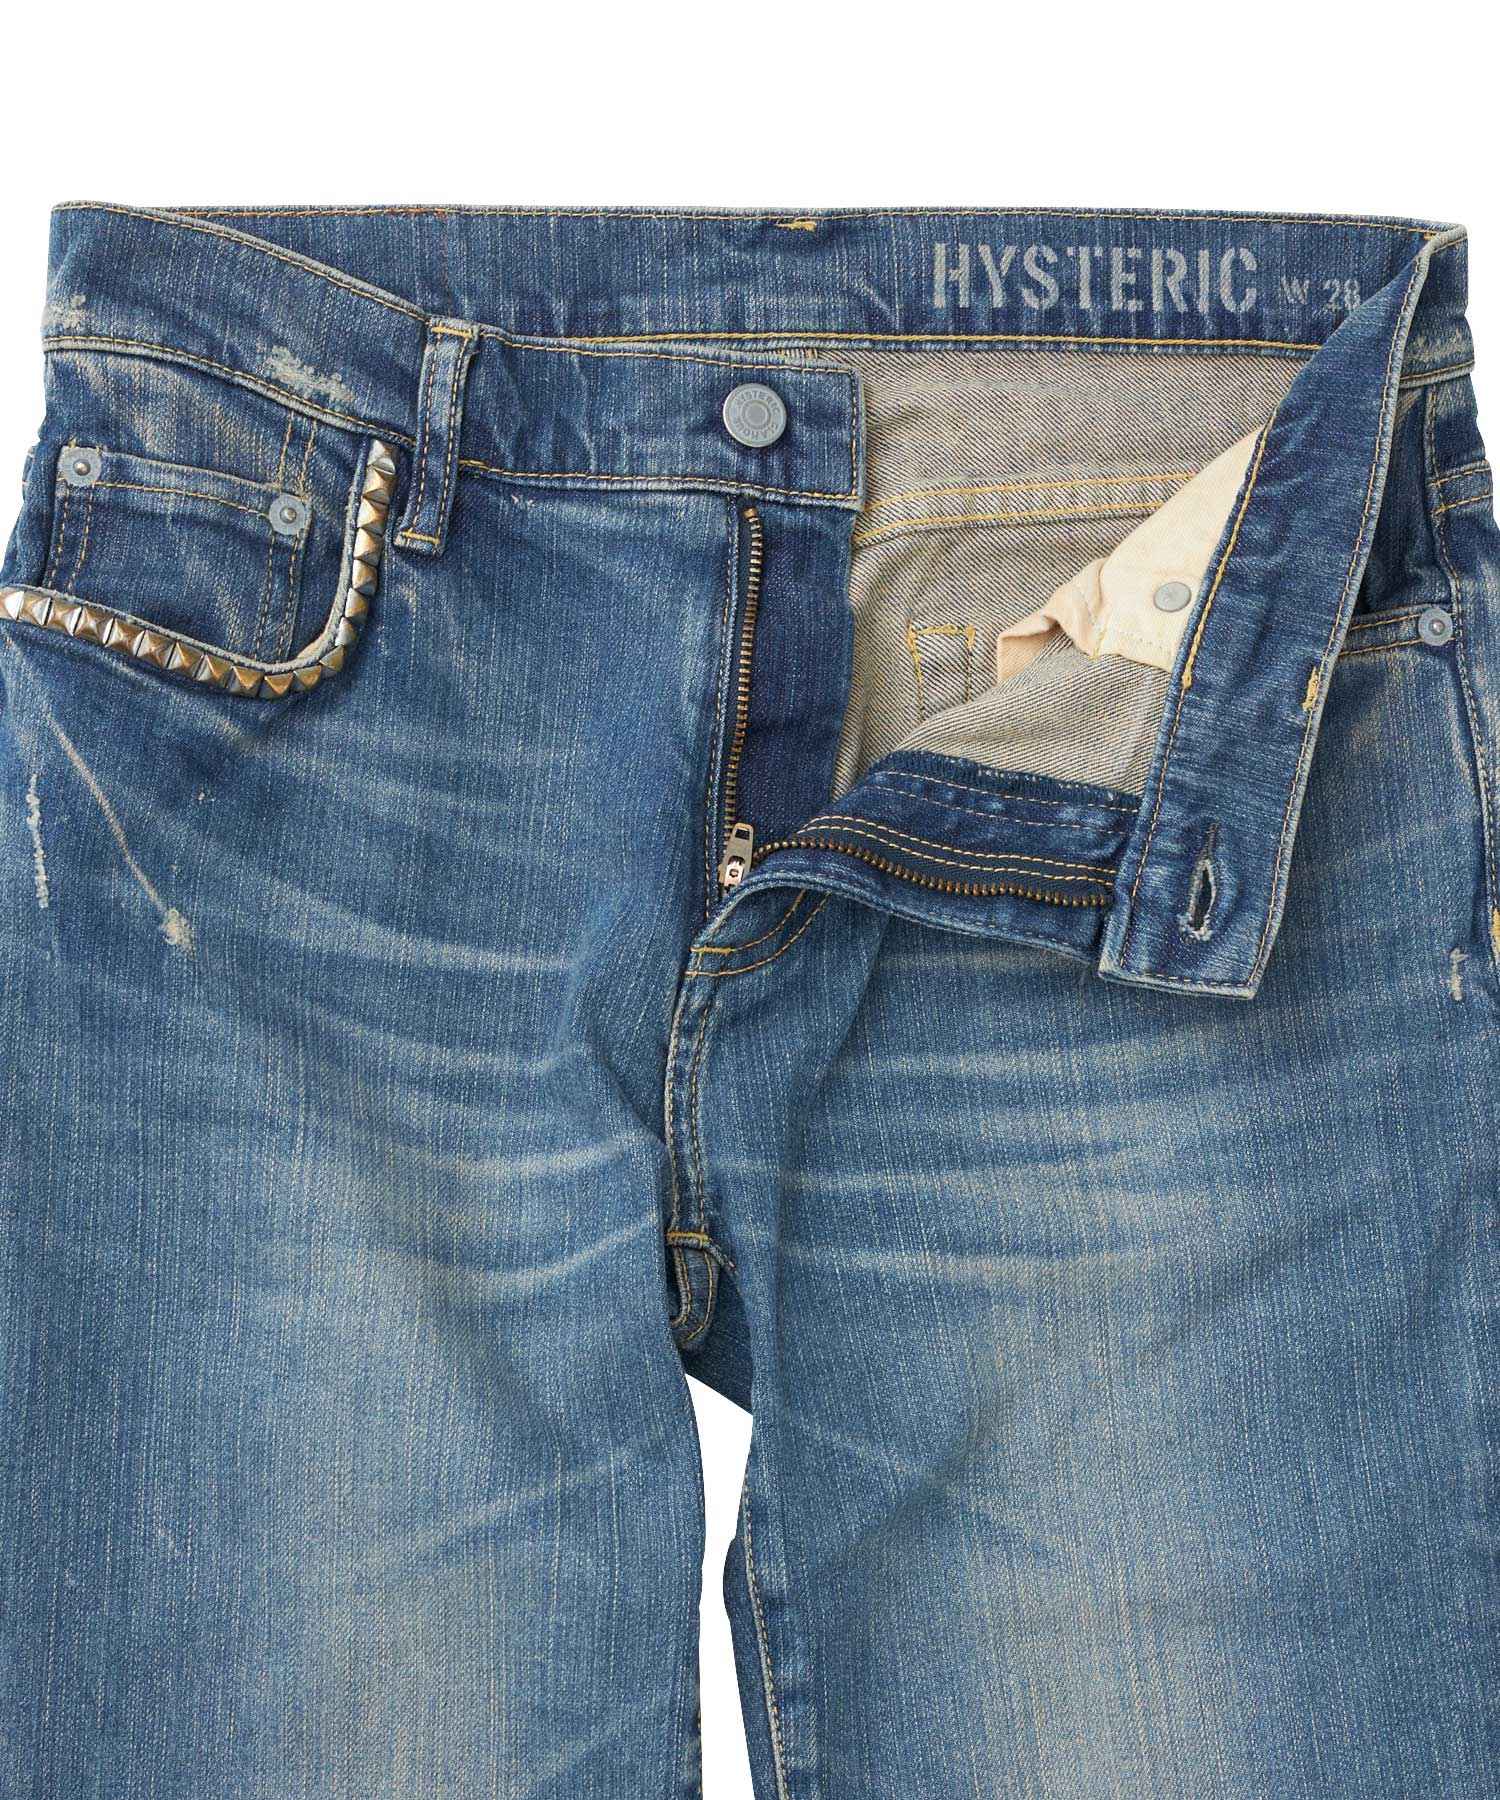 SP加工スリムデニムパンツ HYSTERIC GLAMOUR WOMEN│HYSTERIC GLAMOUR 